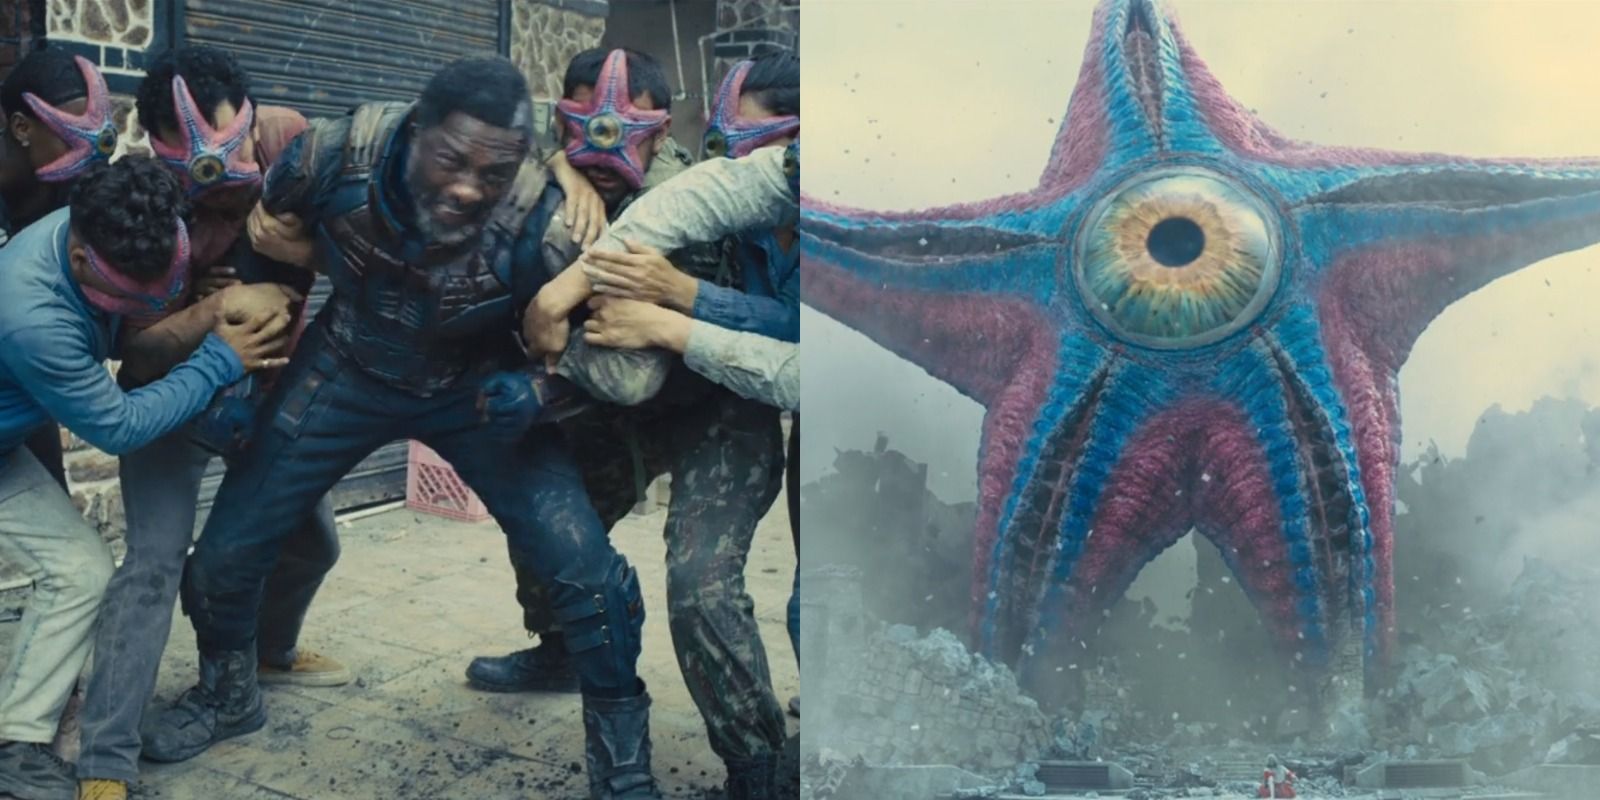 Side-by-side view of Bloodsport being attacked by Starro's infected horde on the left and Starro breaking out of Jotunheim on the right in James Gunn's The Suicide Squad